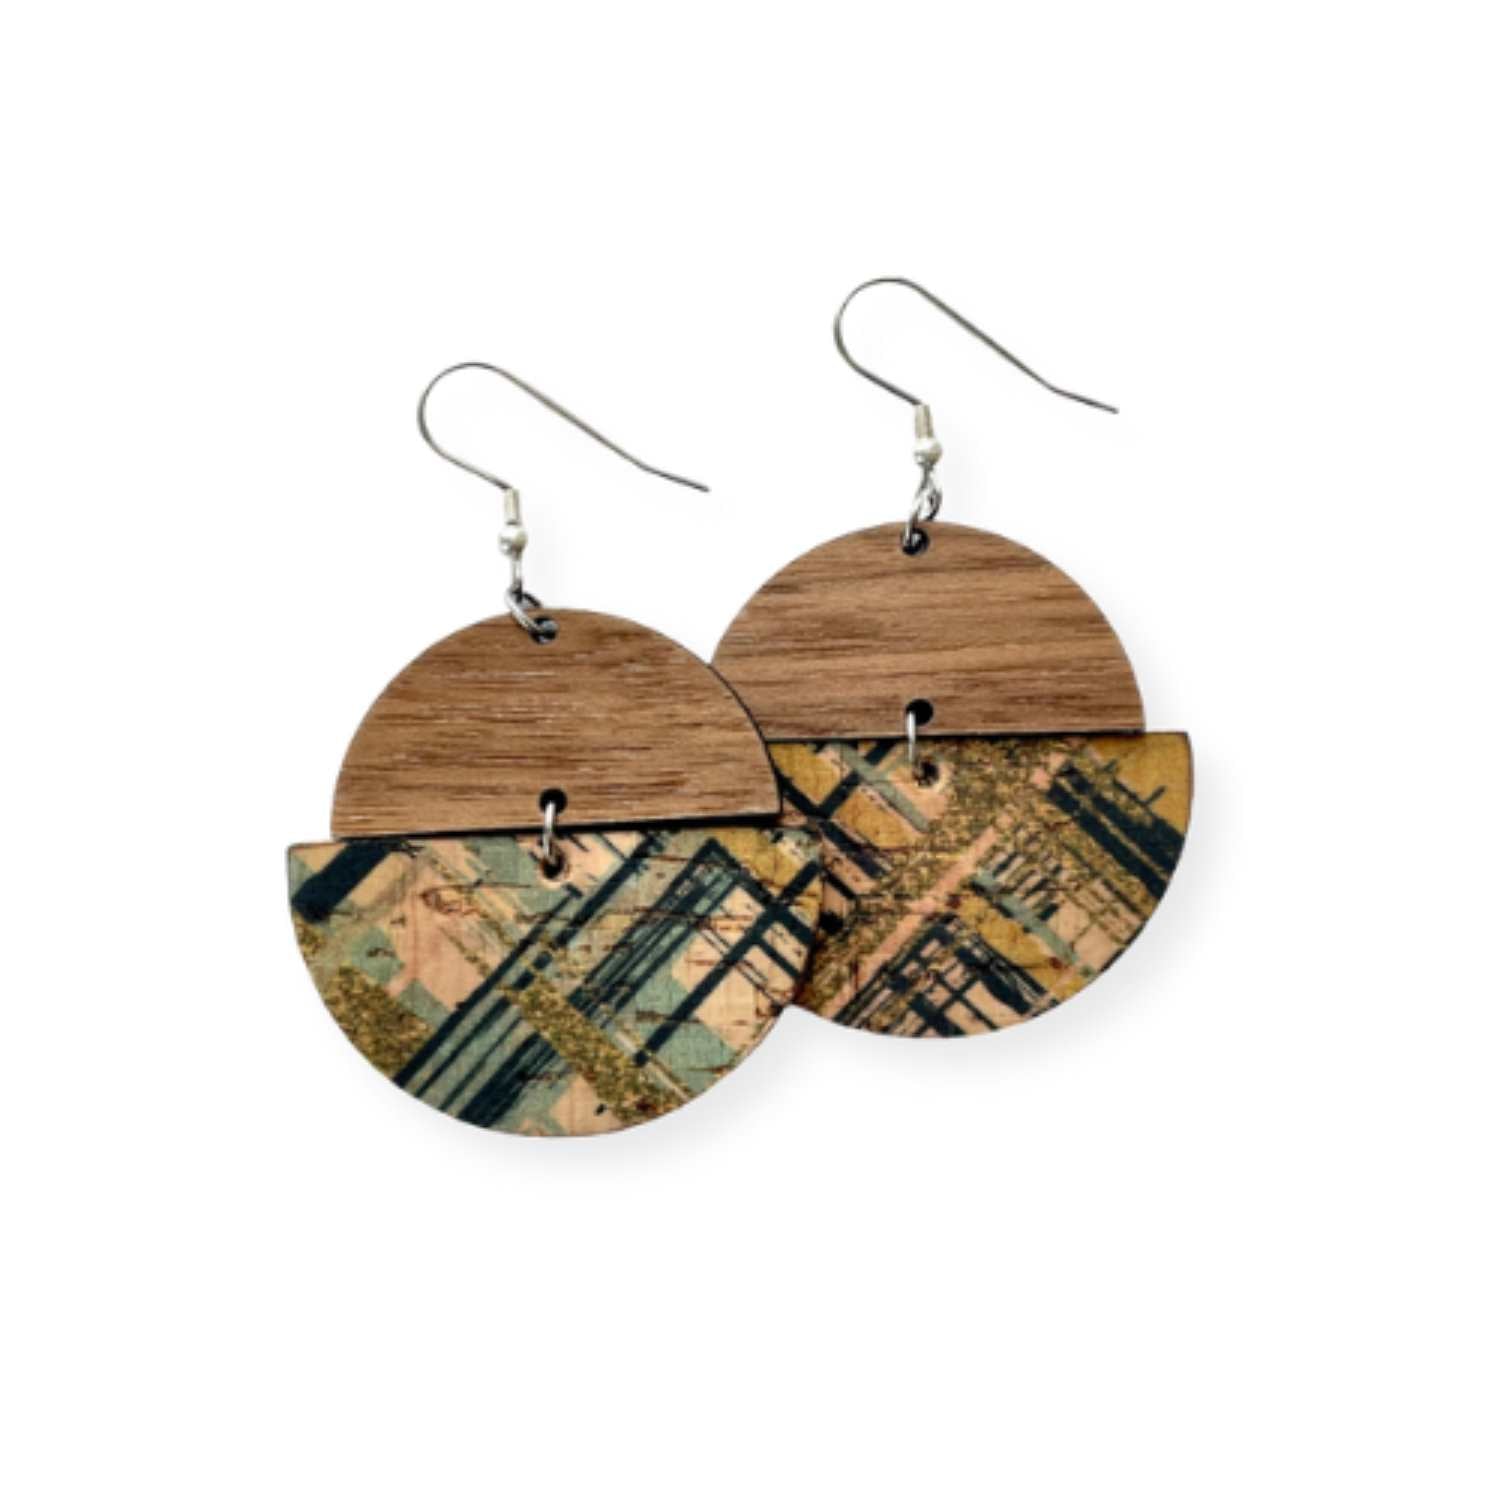 Everly Cork and Wood Handcrafted Round Earrings-Green Weave